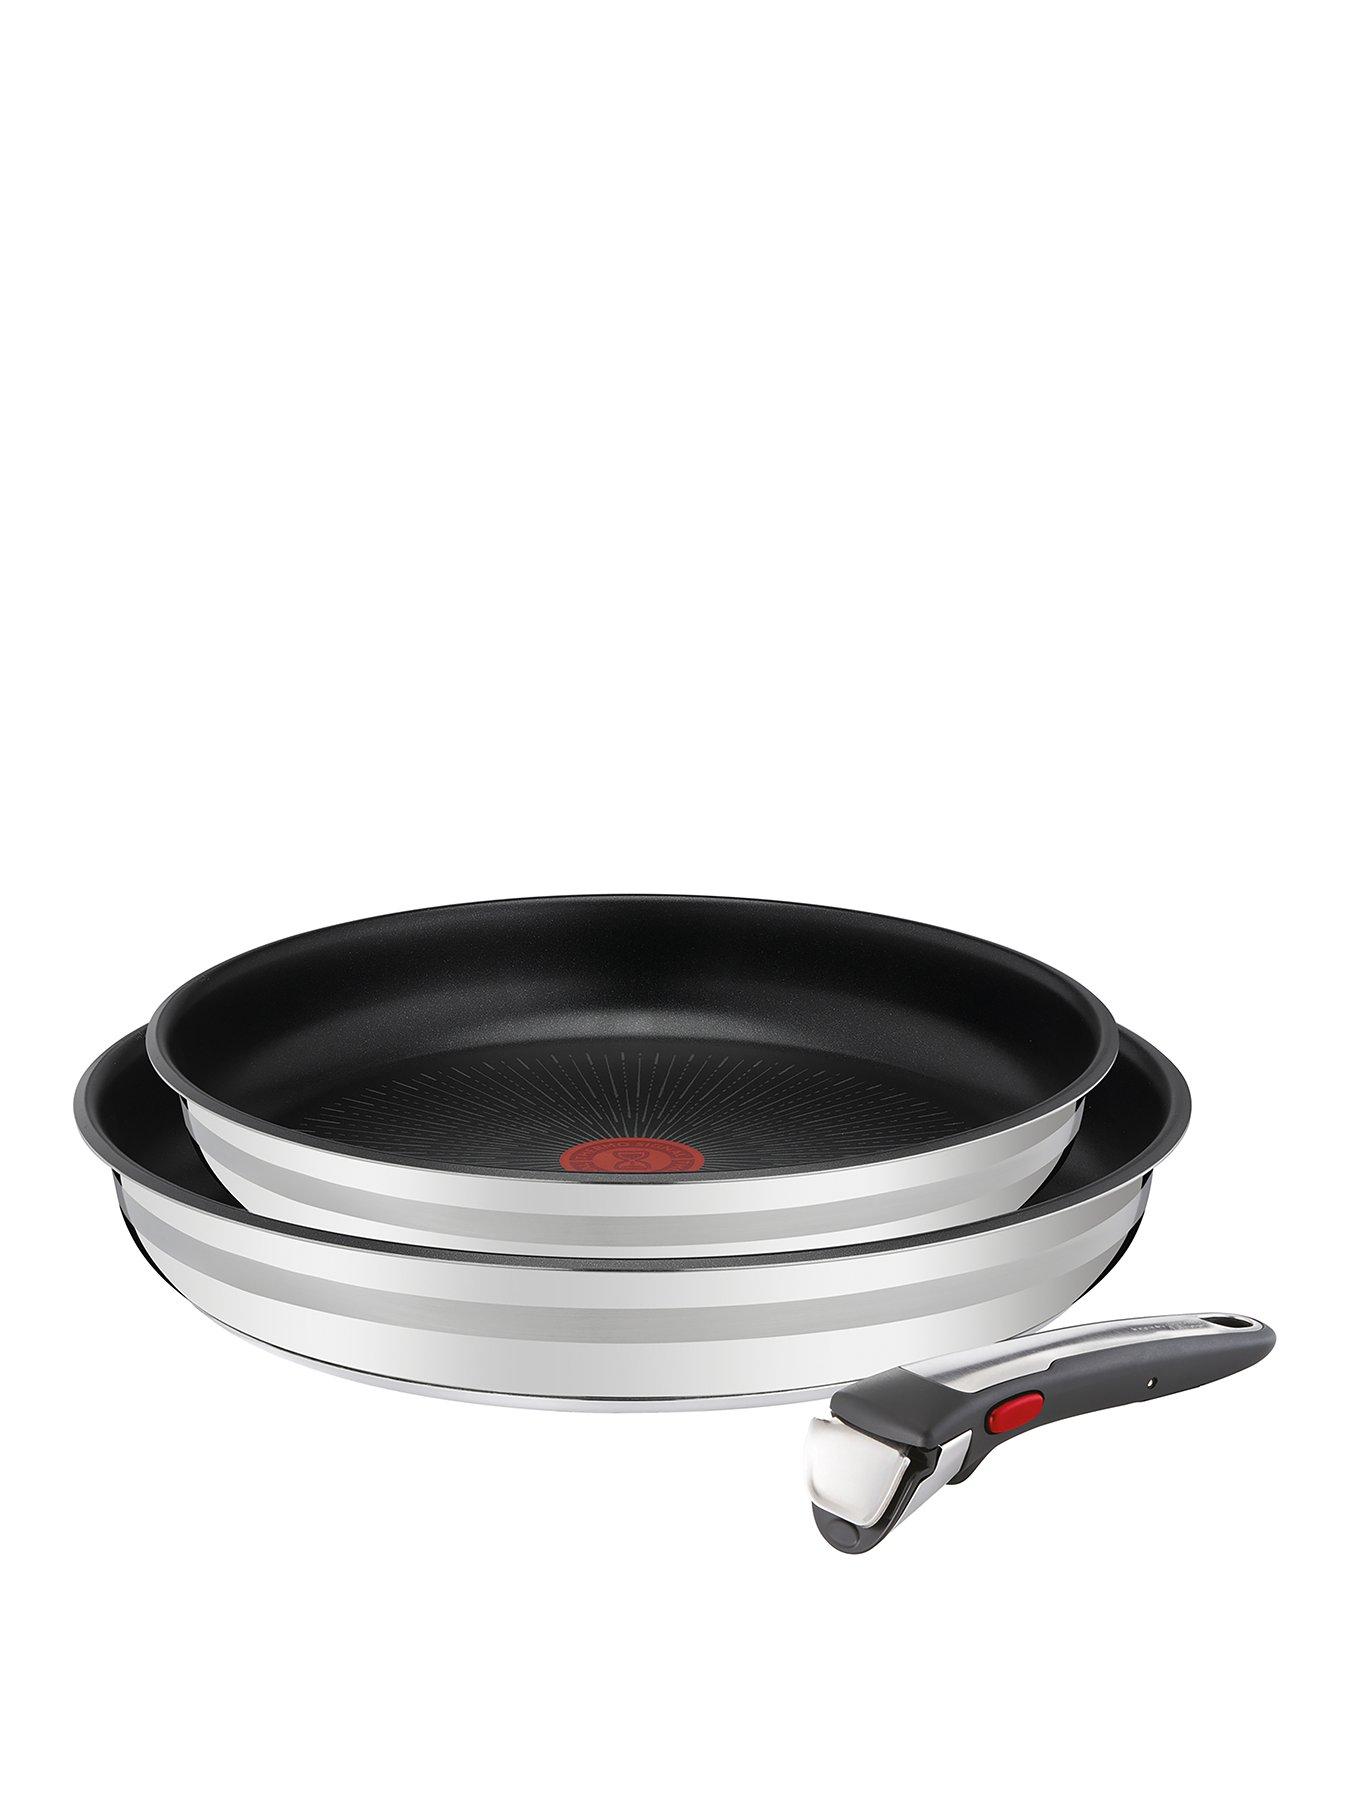 Tefal - The latest Jamie Oliver by Tefal Ingenio cookware